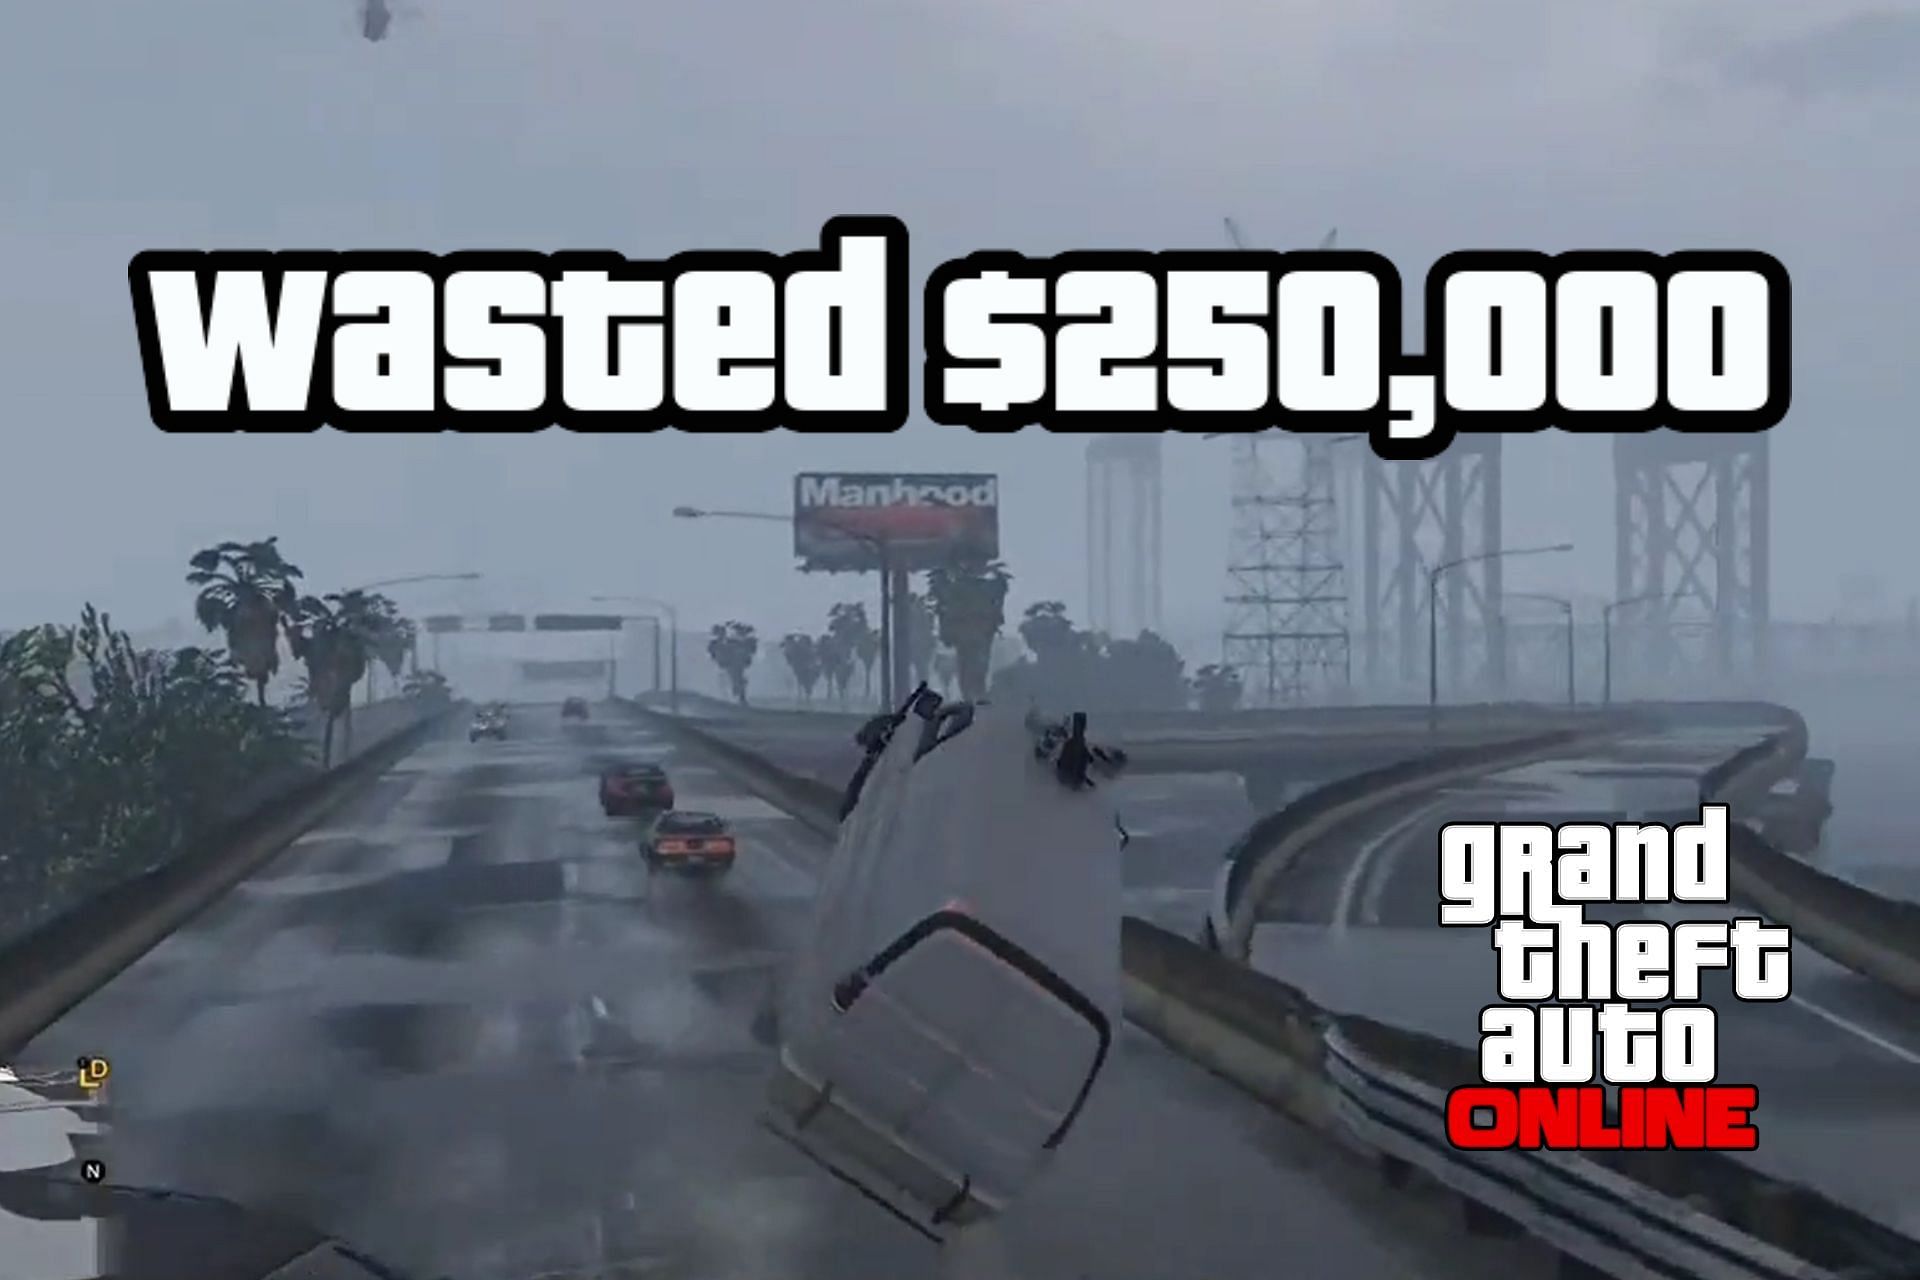 Watch how a GTA Online player lost $250,000 in a matter of seconds (Image via Sportskeeda)